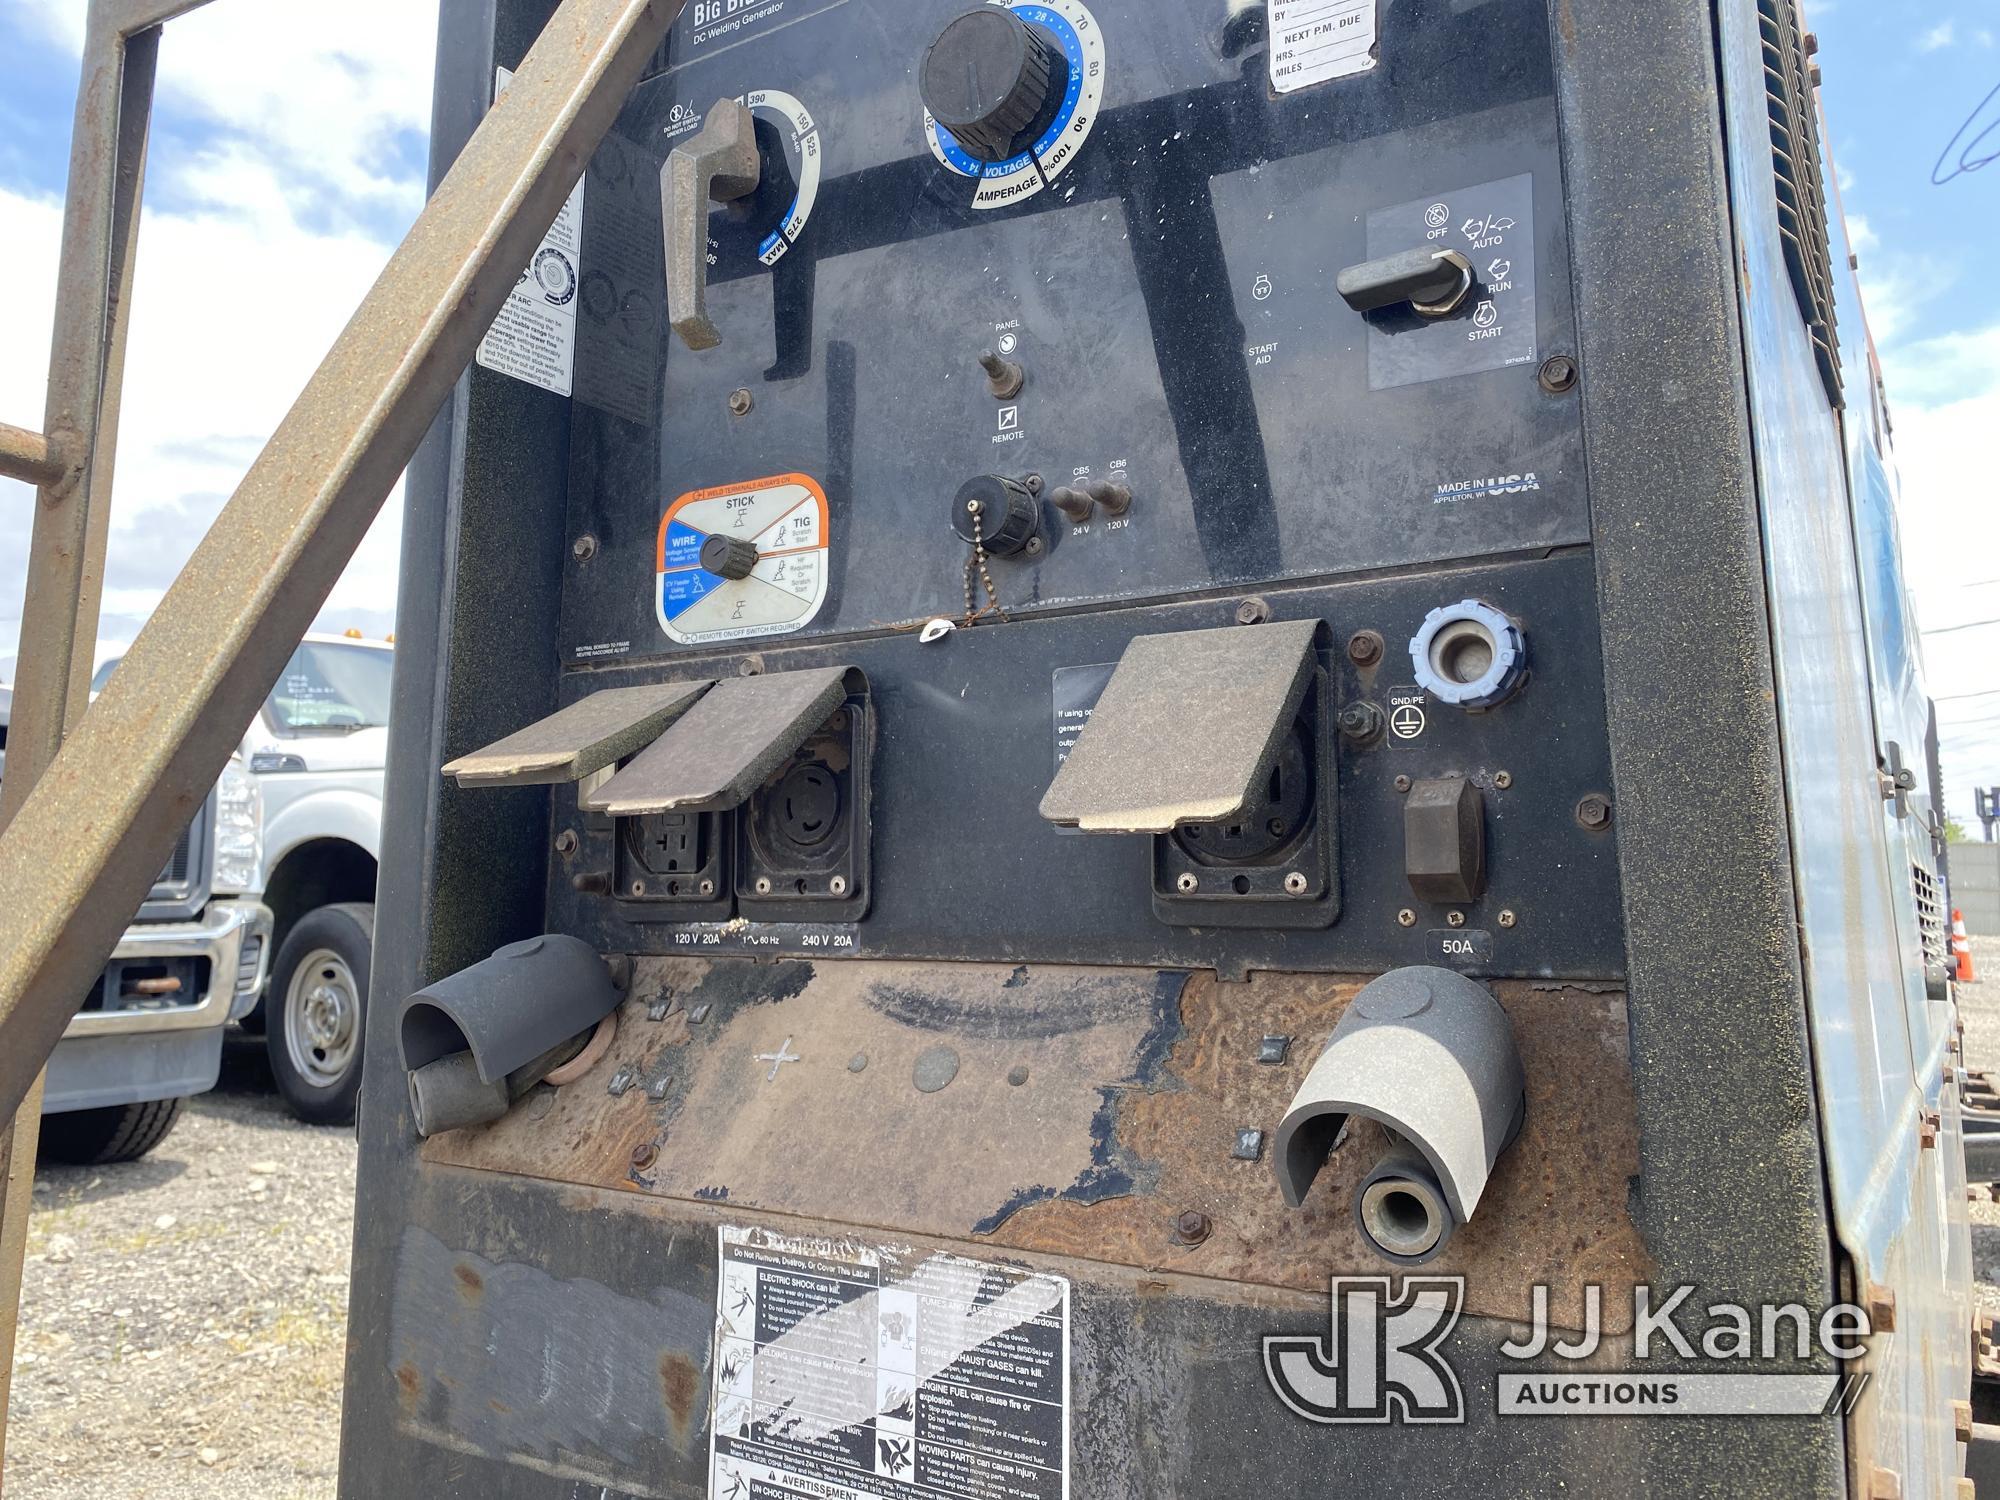 (Plymouth Meeting, PA) Miller Big Blue 500D Welder/Generator Not Running, Condition Unknown, Tires O